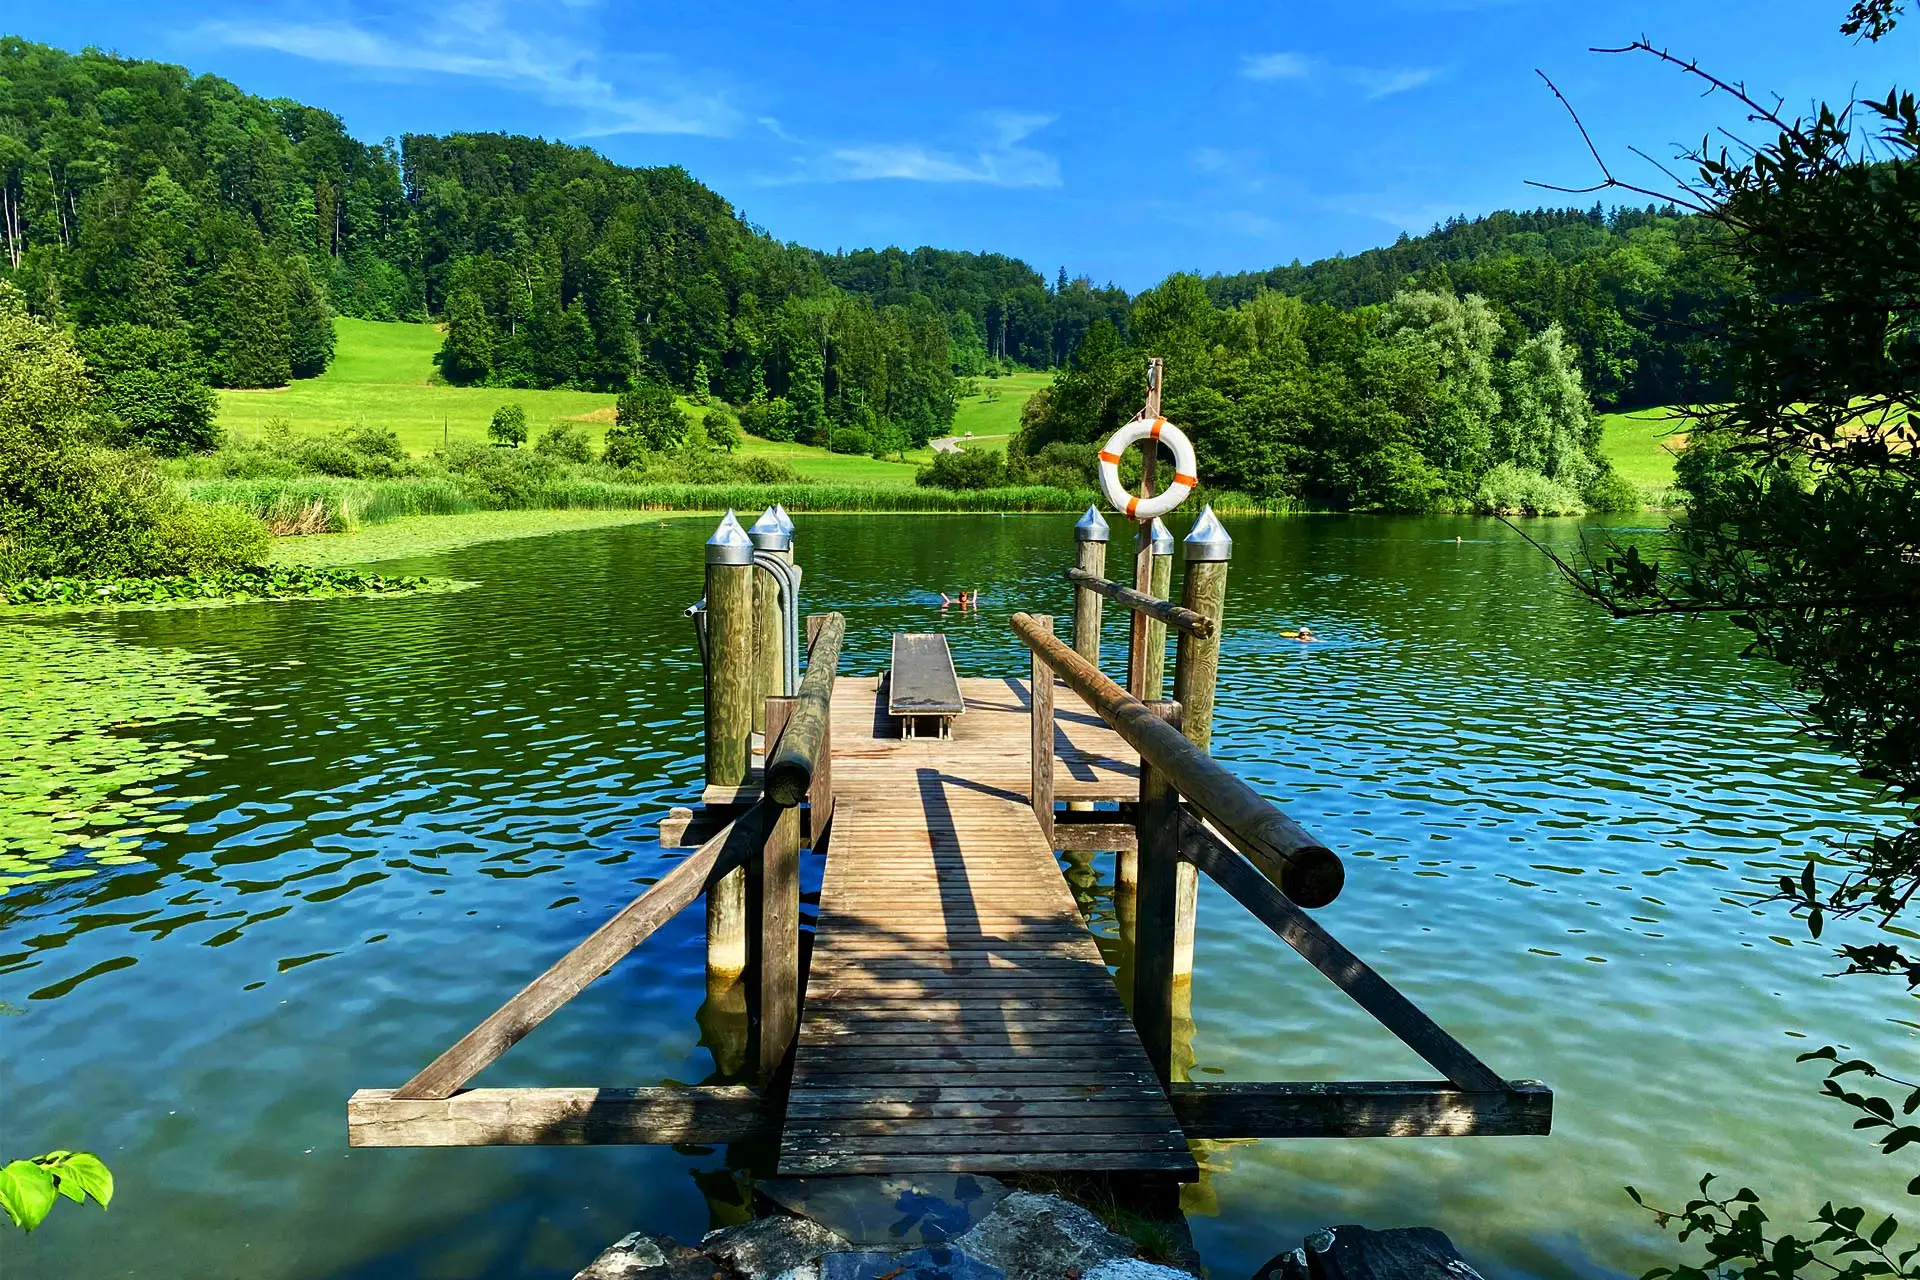 Bichelsee is a wonderful and very unknown lake near Zurich.